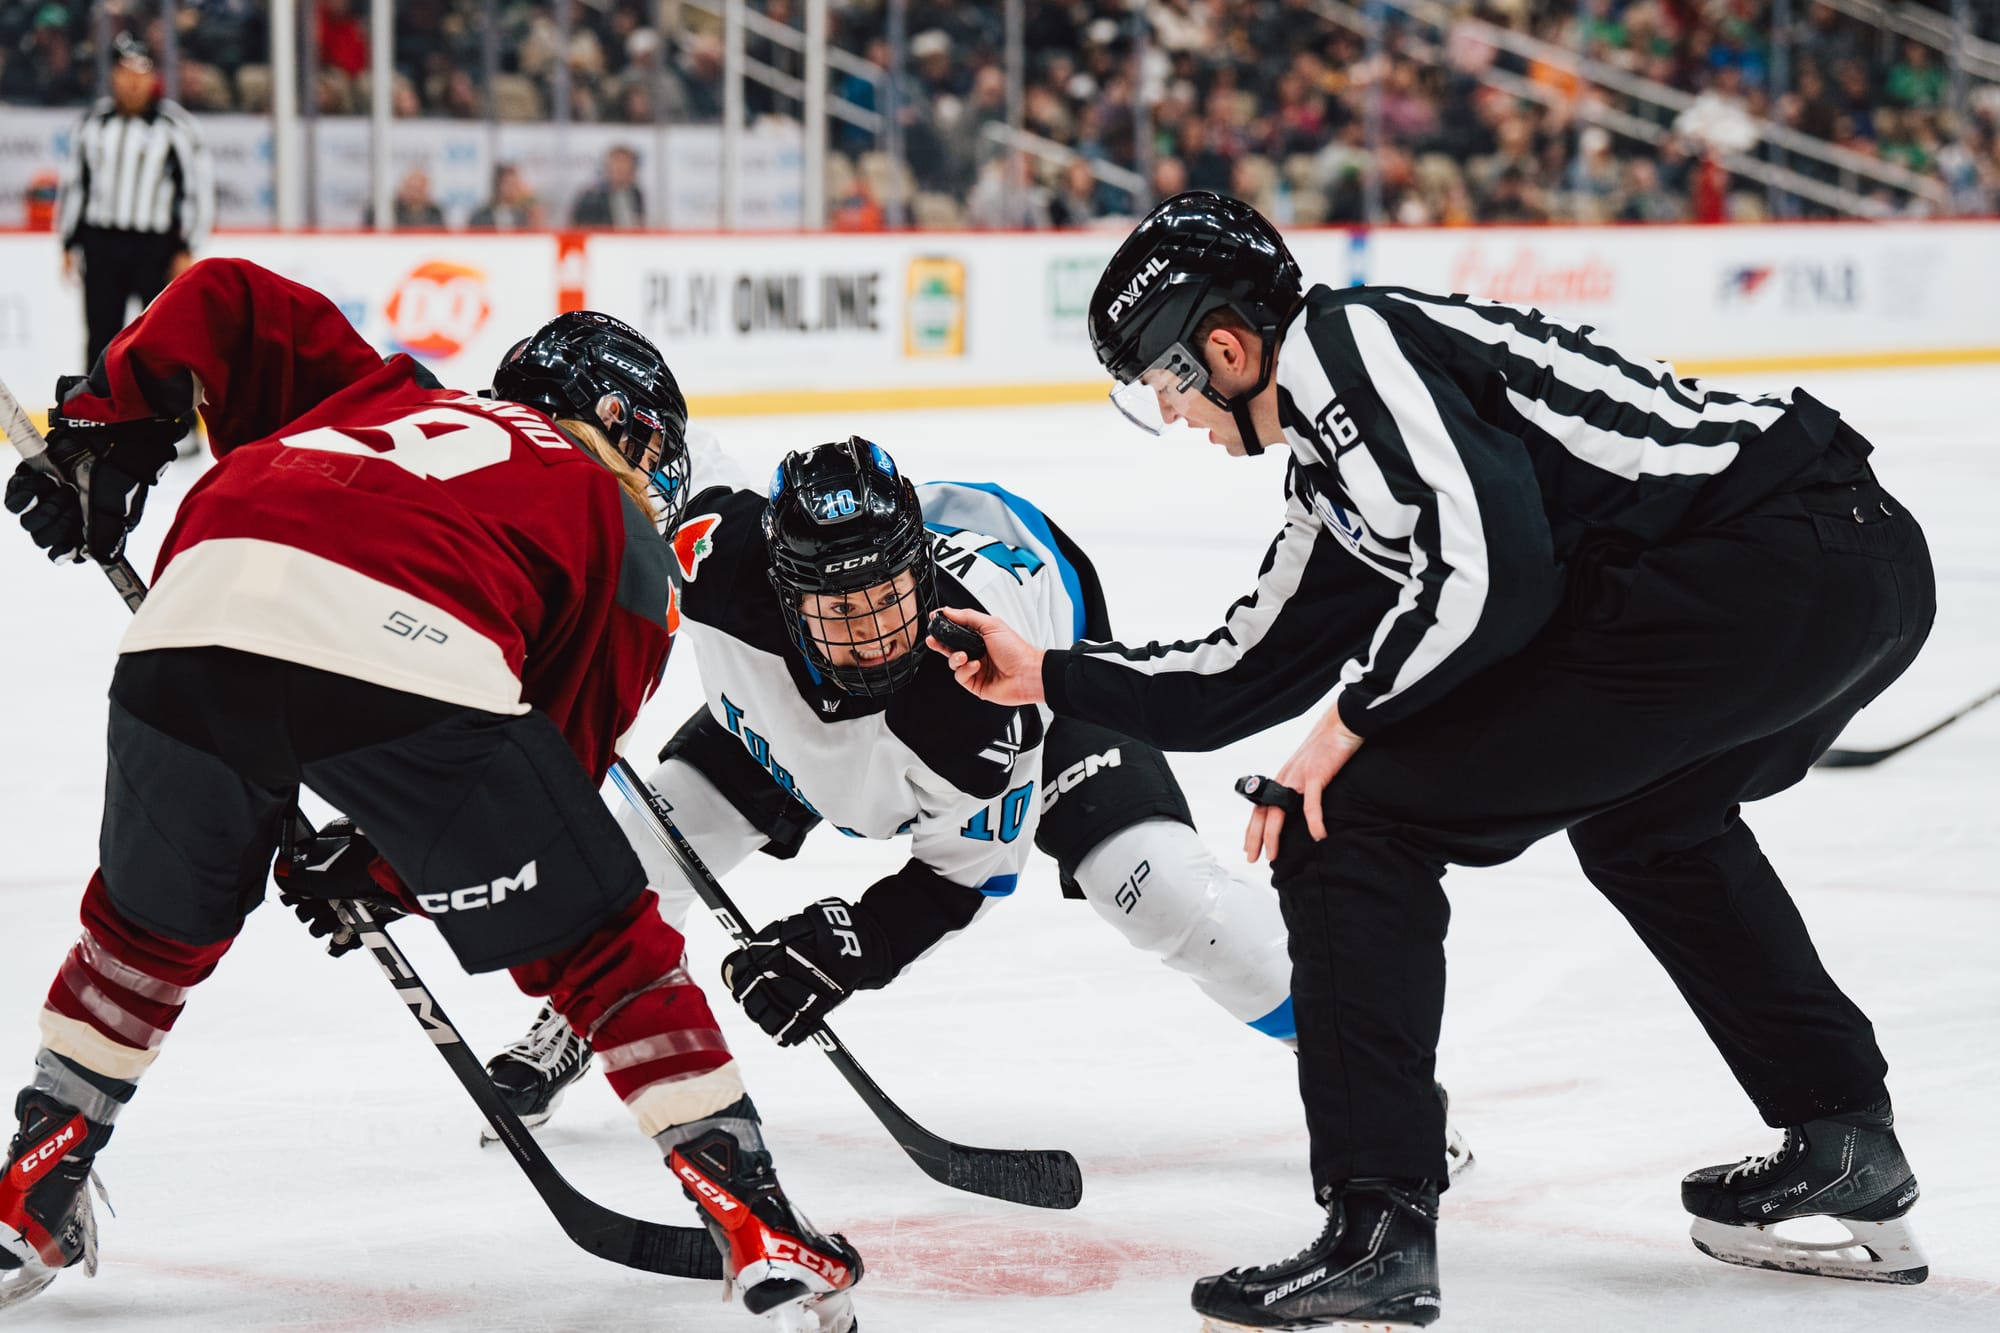 Alex Vasko lines up for the faceoff with a focused, clenched-teeth smile. Gabrielle David is on the other side of the dot, while the ref is to their left about the drop the puck. Vasko is in white, while David is in maroon.